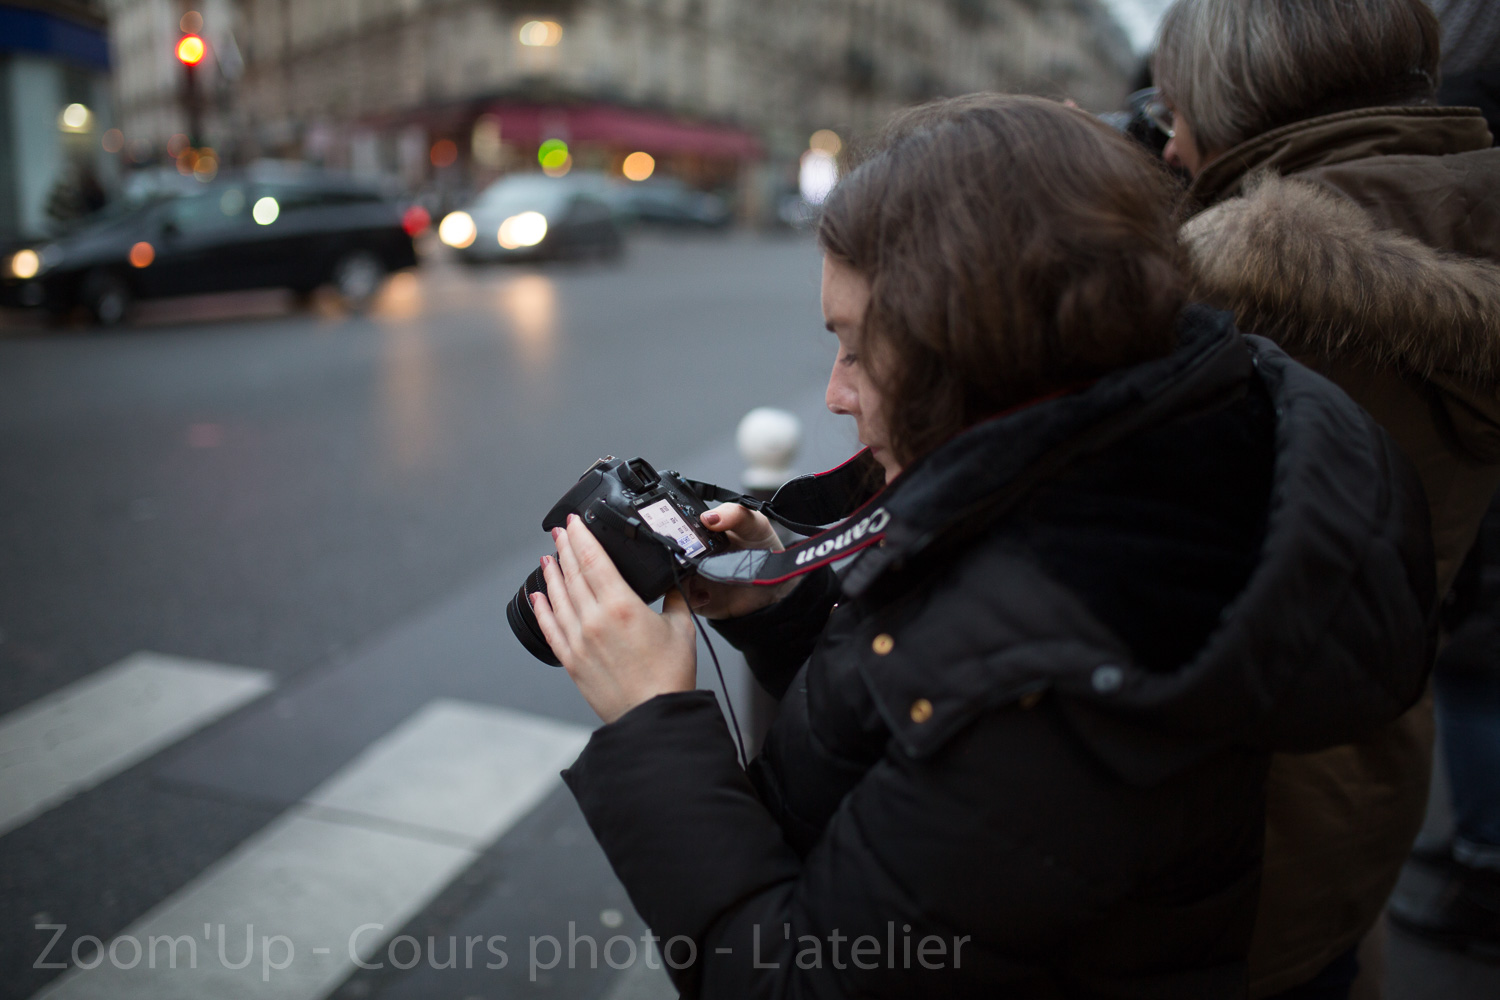 Zoom'Up - Cours photo - L'atelier;